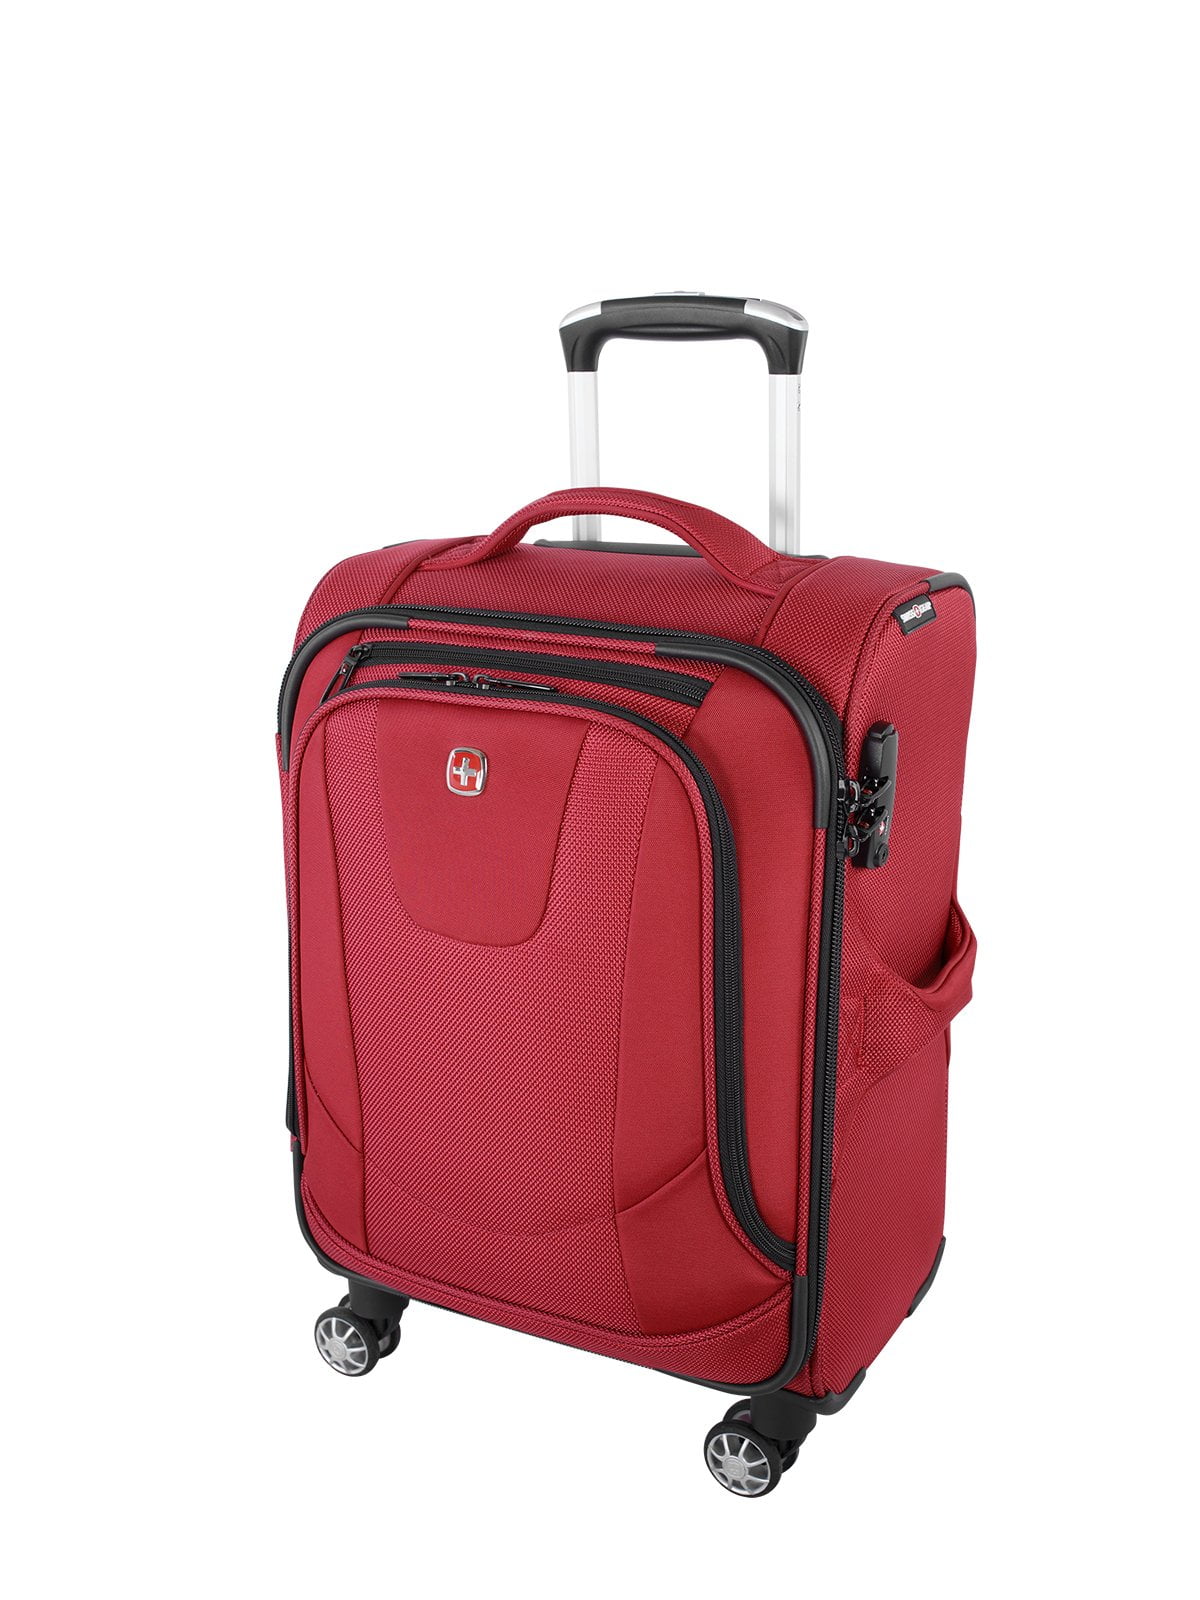 Swiss Gear Neo Lite 3 Carry-On Poly Spinner Luggage - Red